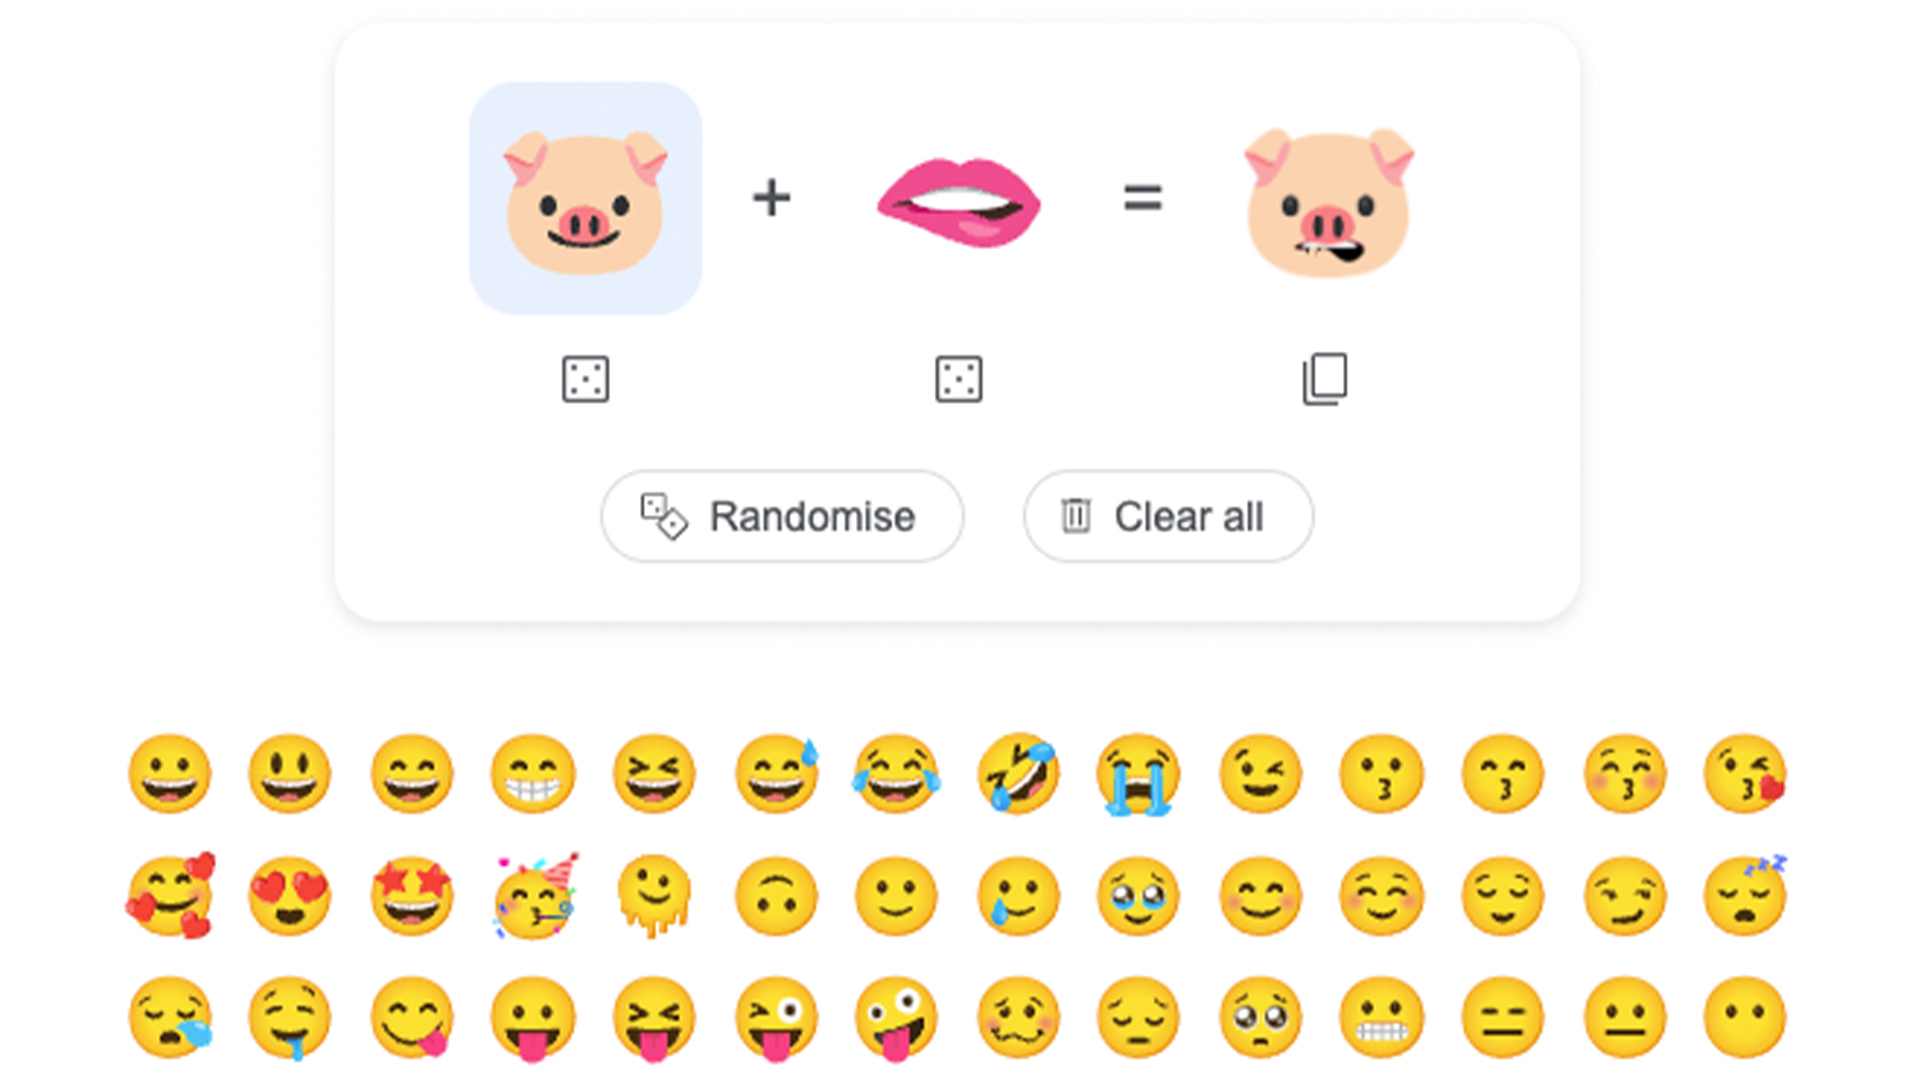 Android's Google Emoji Kitchen has given us the most cursed emojis